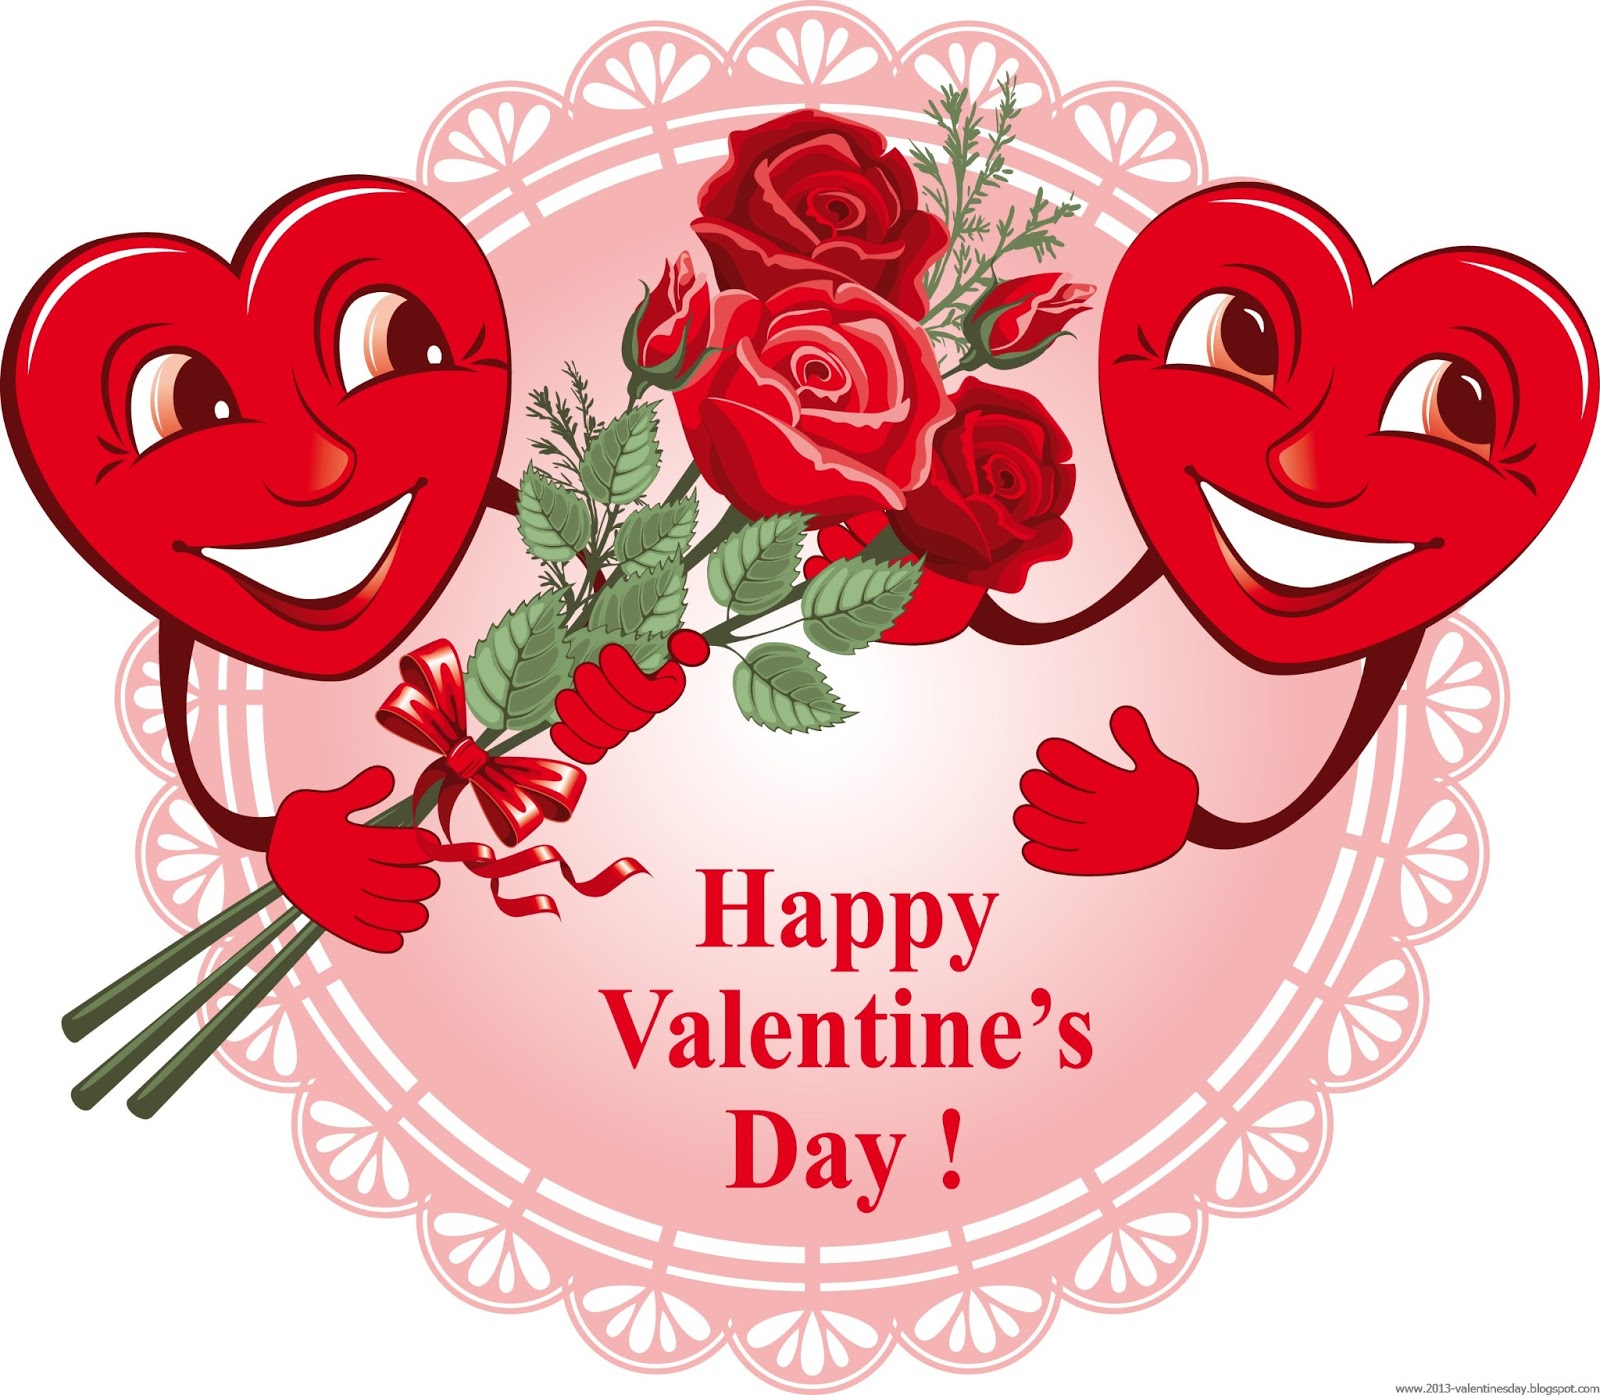 Valentines day Clip Art Collection 2013